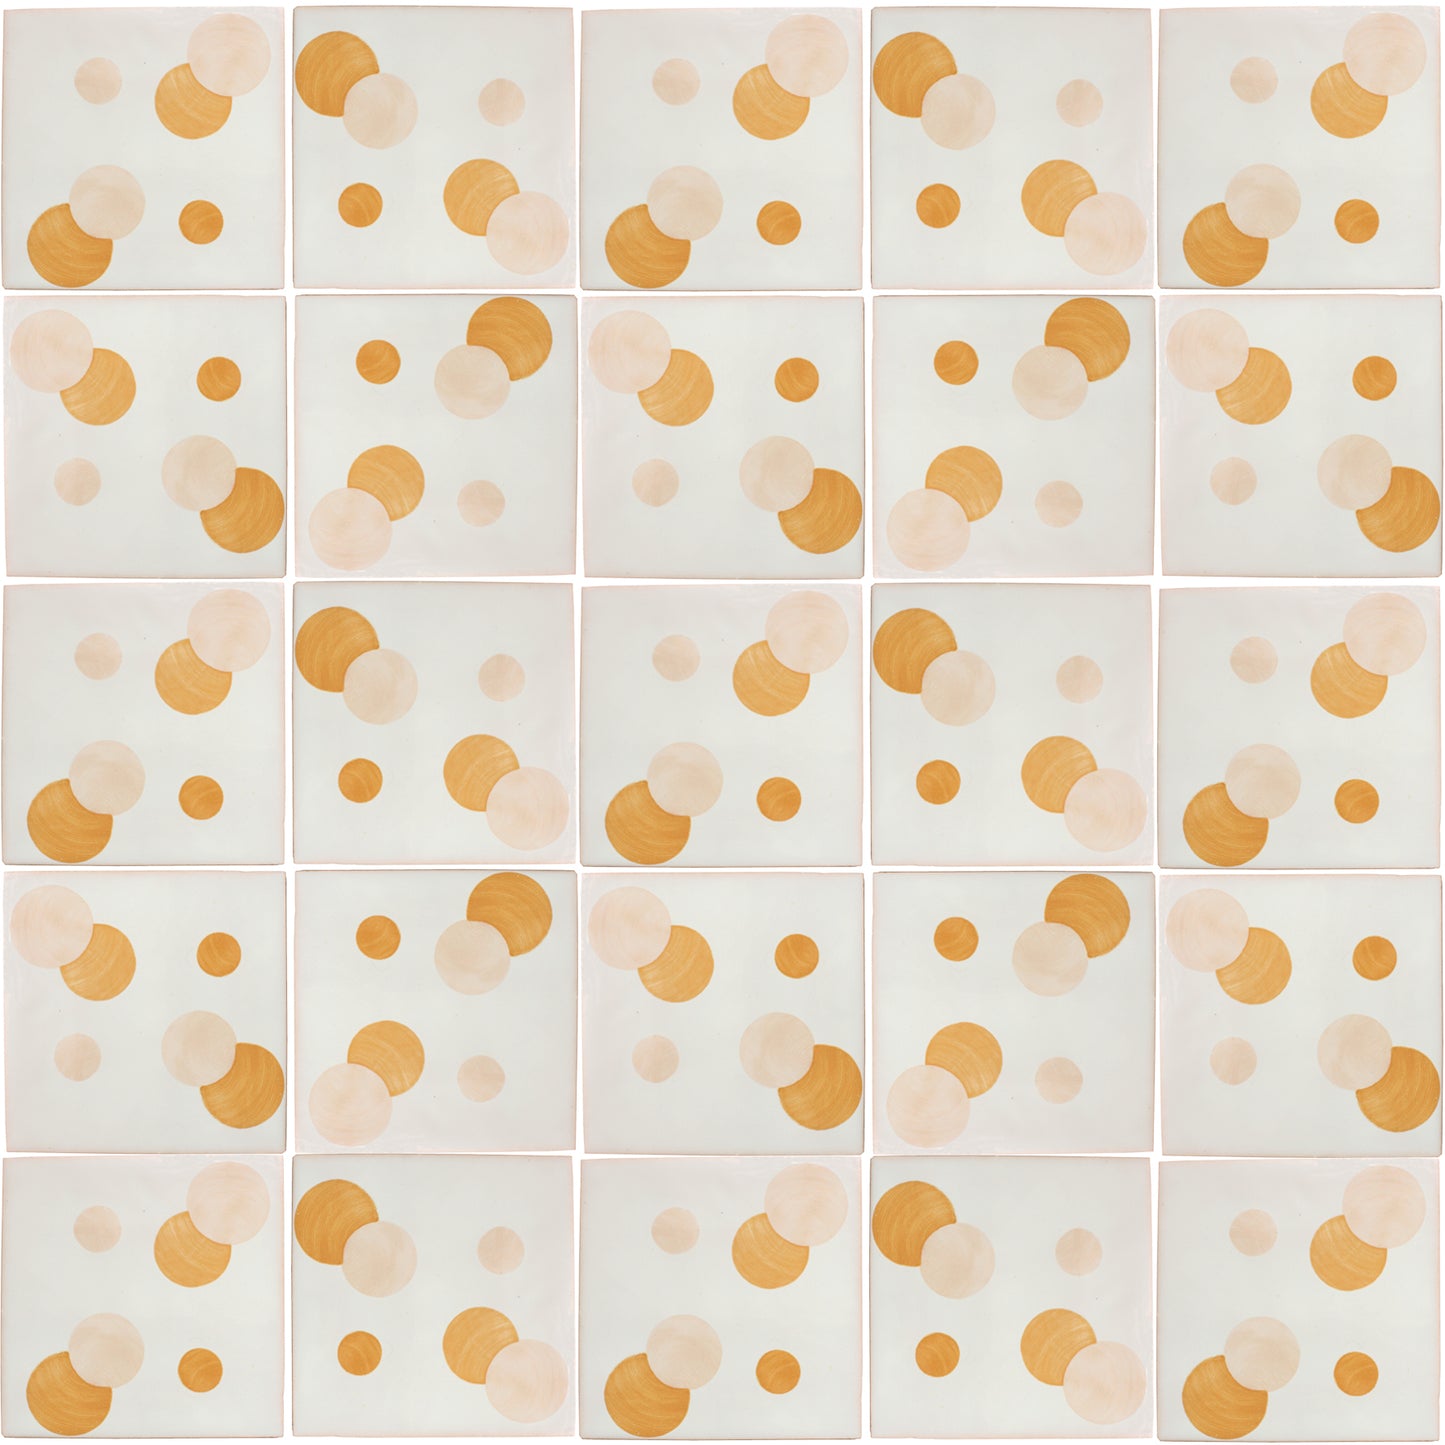 Hand painted Domino pattern tiles